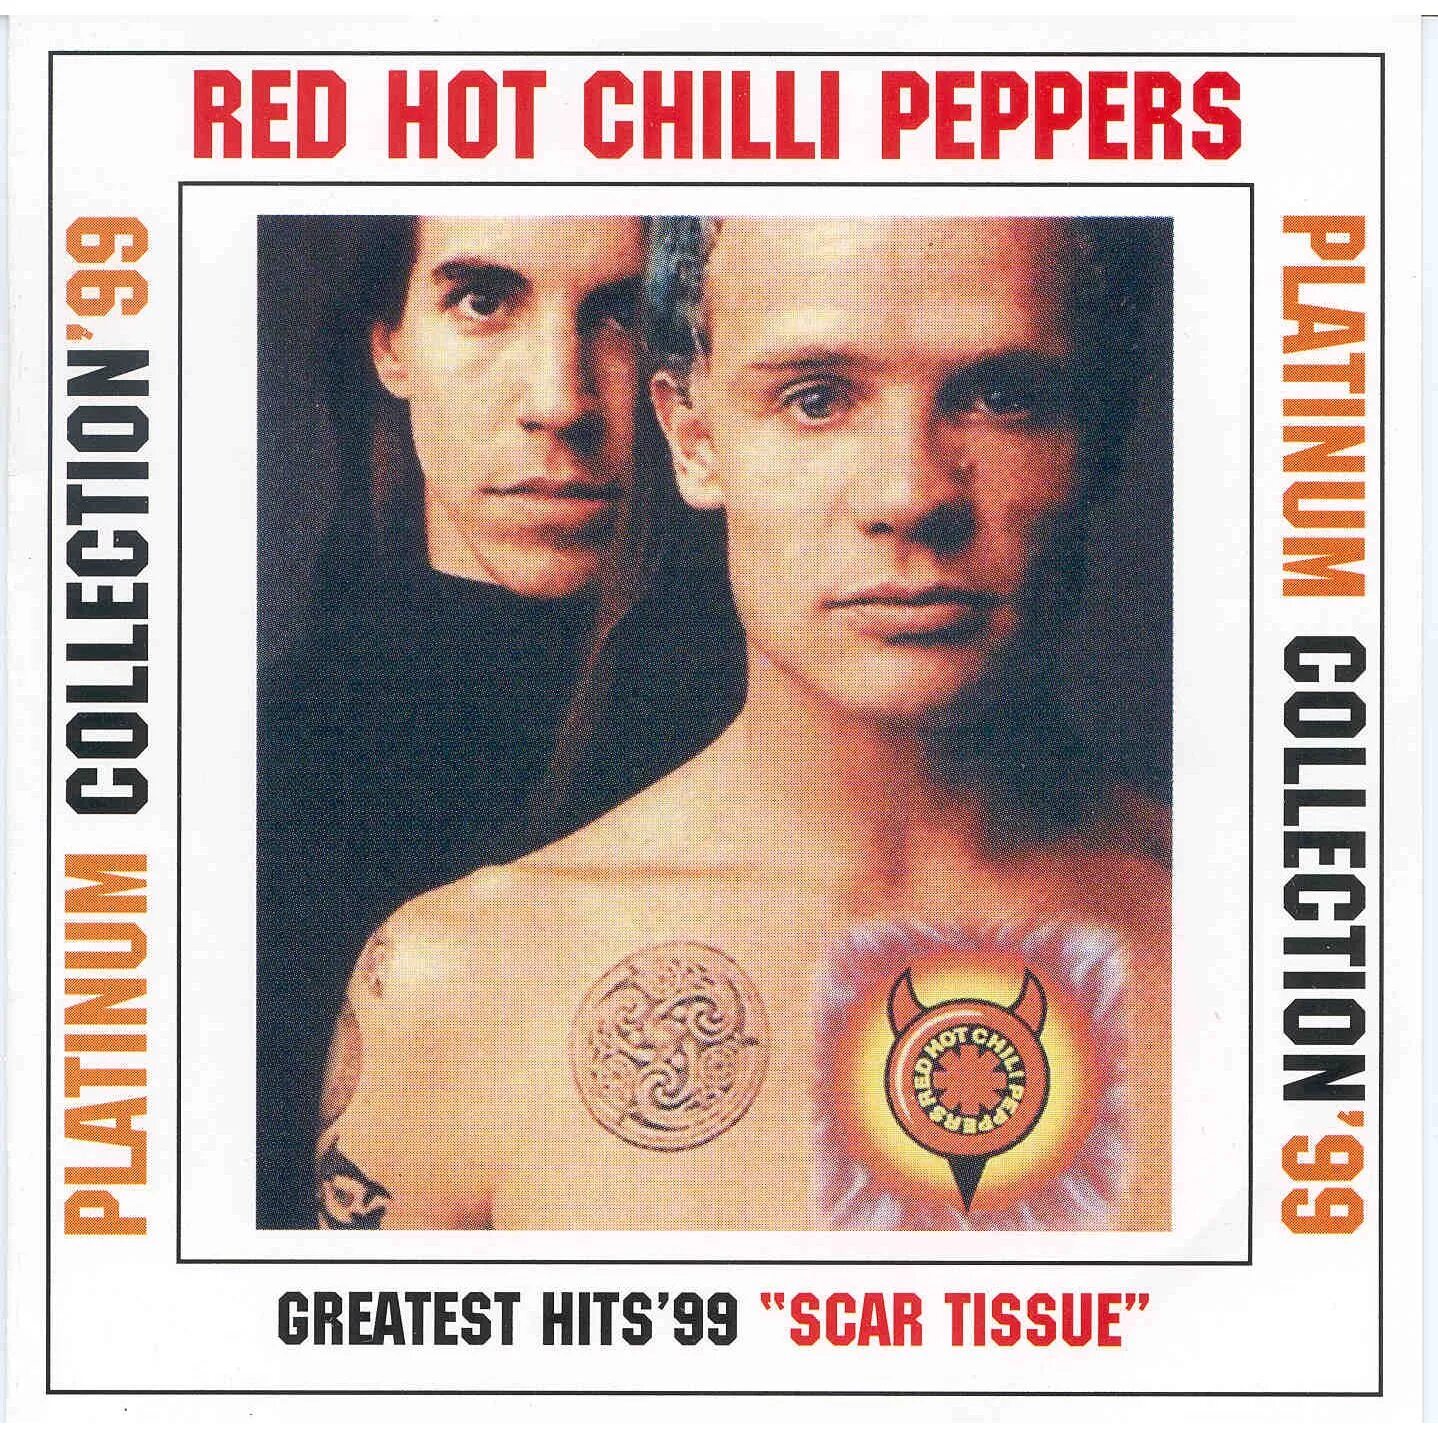 Red hot peppers mp3. Ред хот Чили Пепперс. Red hot Chili Peppers обложка. Red hot Chili Peppers альбомы. RHCP обложки альбомов.